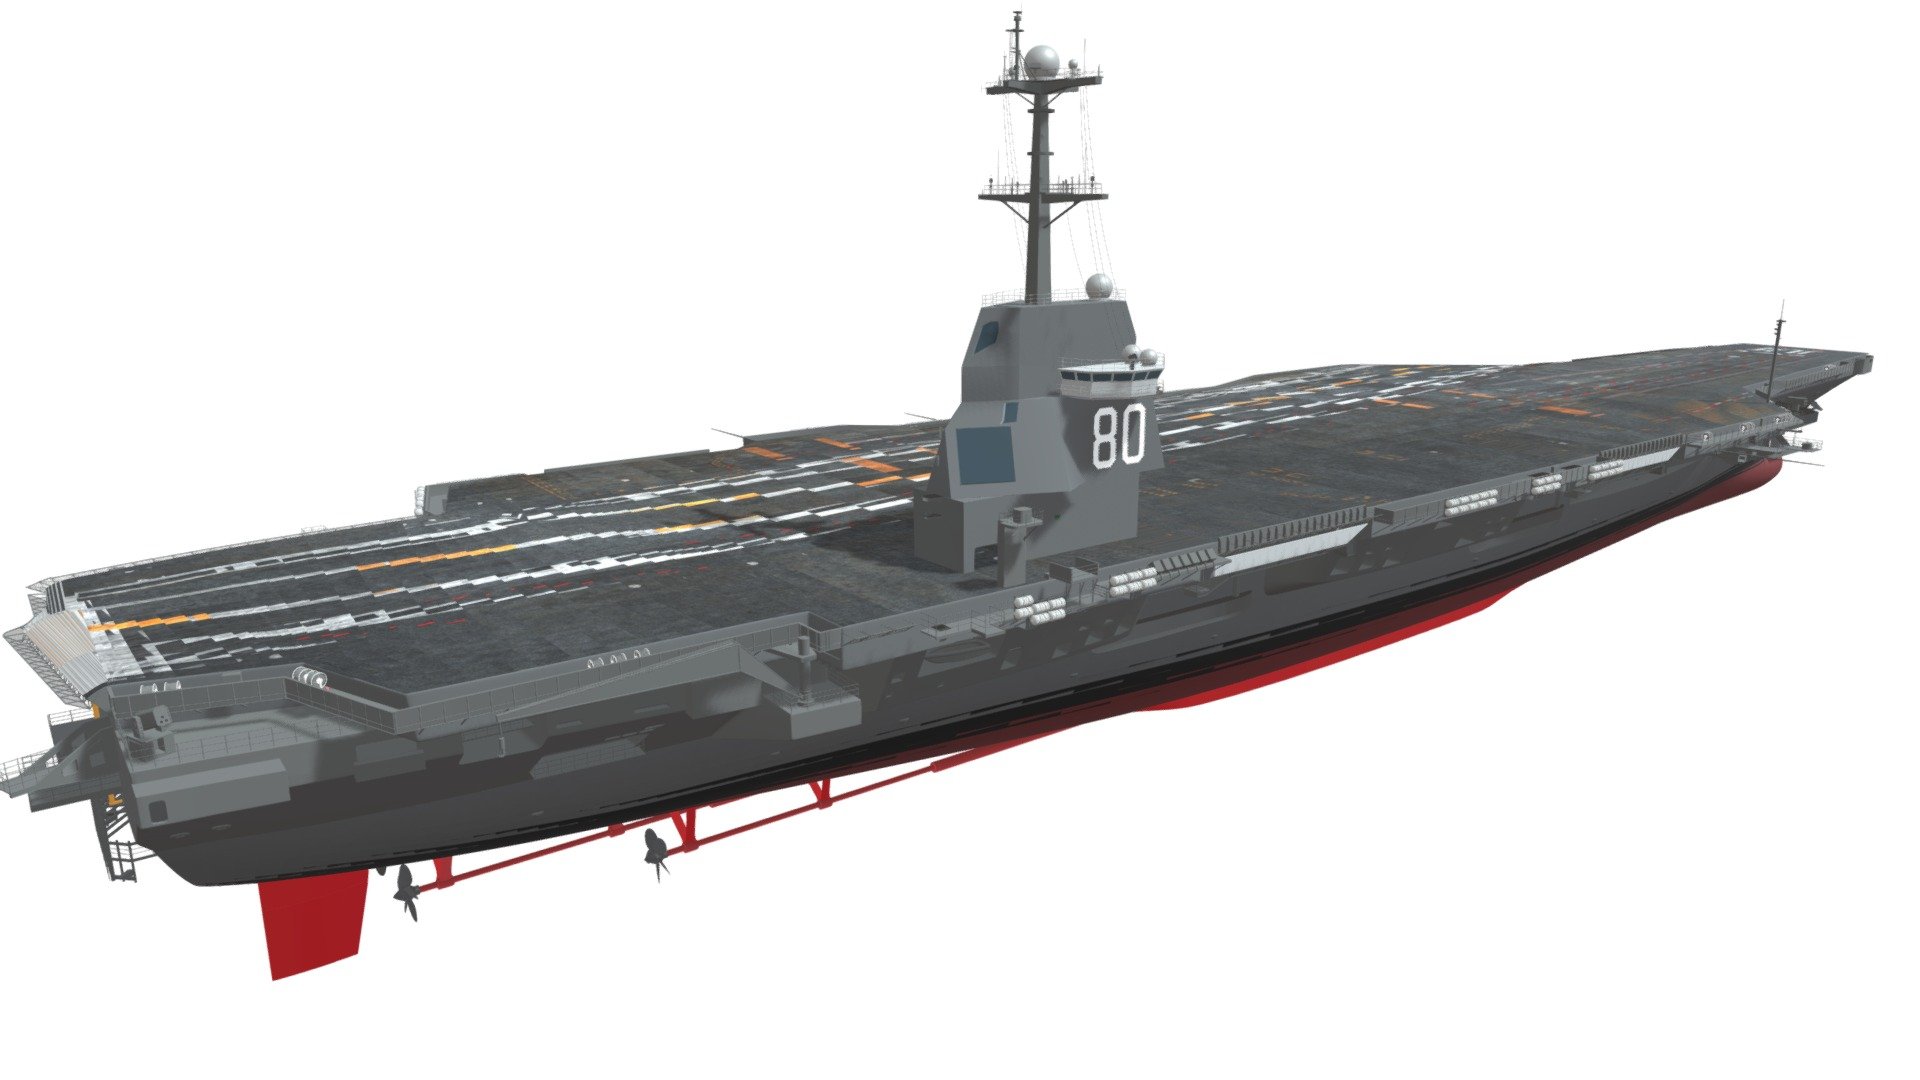 High quality and professional 3d model of the USS CVN-80 aircraft carrier.
All textures and materials are included and mapped in every format.
Textures are high resolution jpeg images up to (6144 x 6144) pixels.
Many other 3d aircraft carrier models available in this series, please search our catalog.
 - USS CVN 80 Aircraft Carrier - Buy Royalty Free 3D model by 3DHorse 3d model